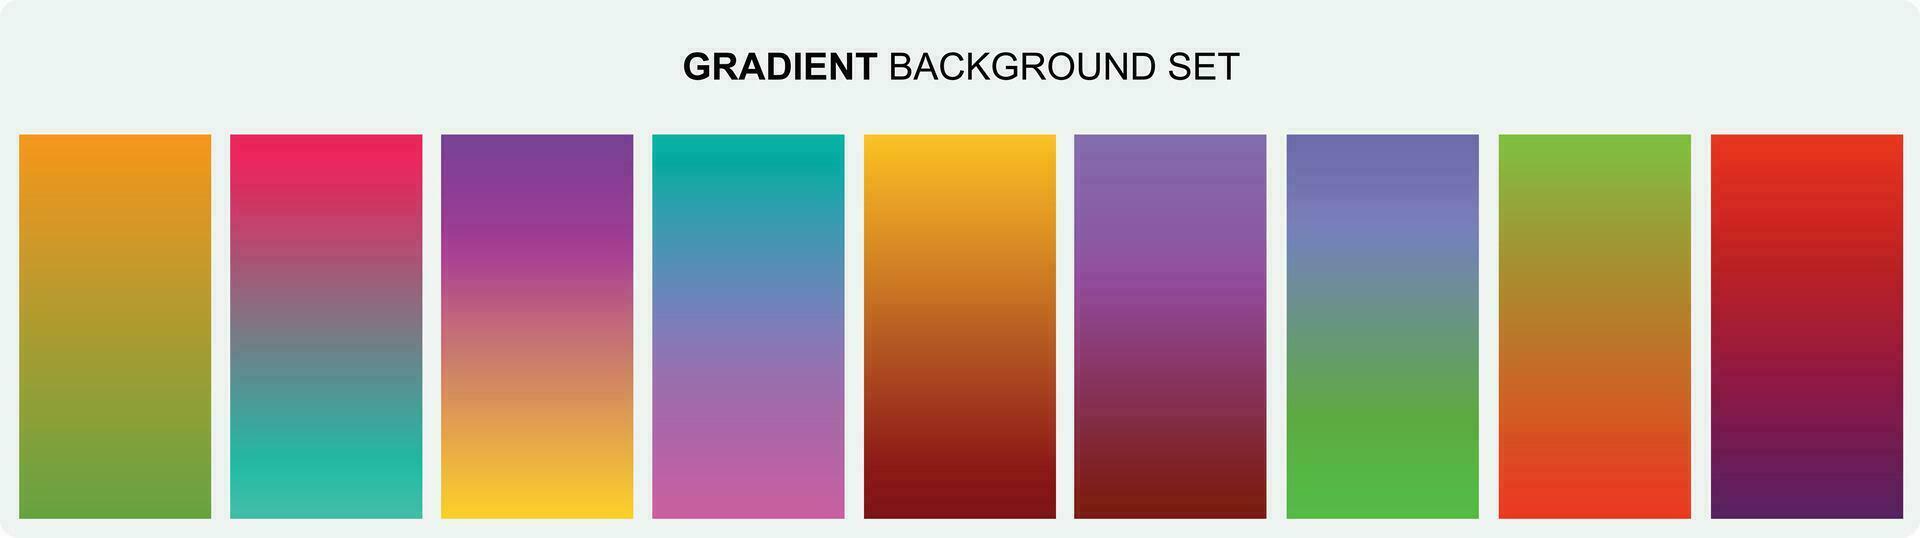 Gradient set. Collection of colorful smooth gradient background for graphic design. Vector illustration